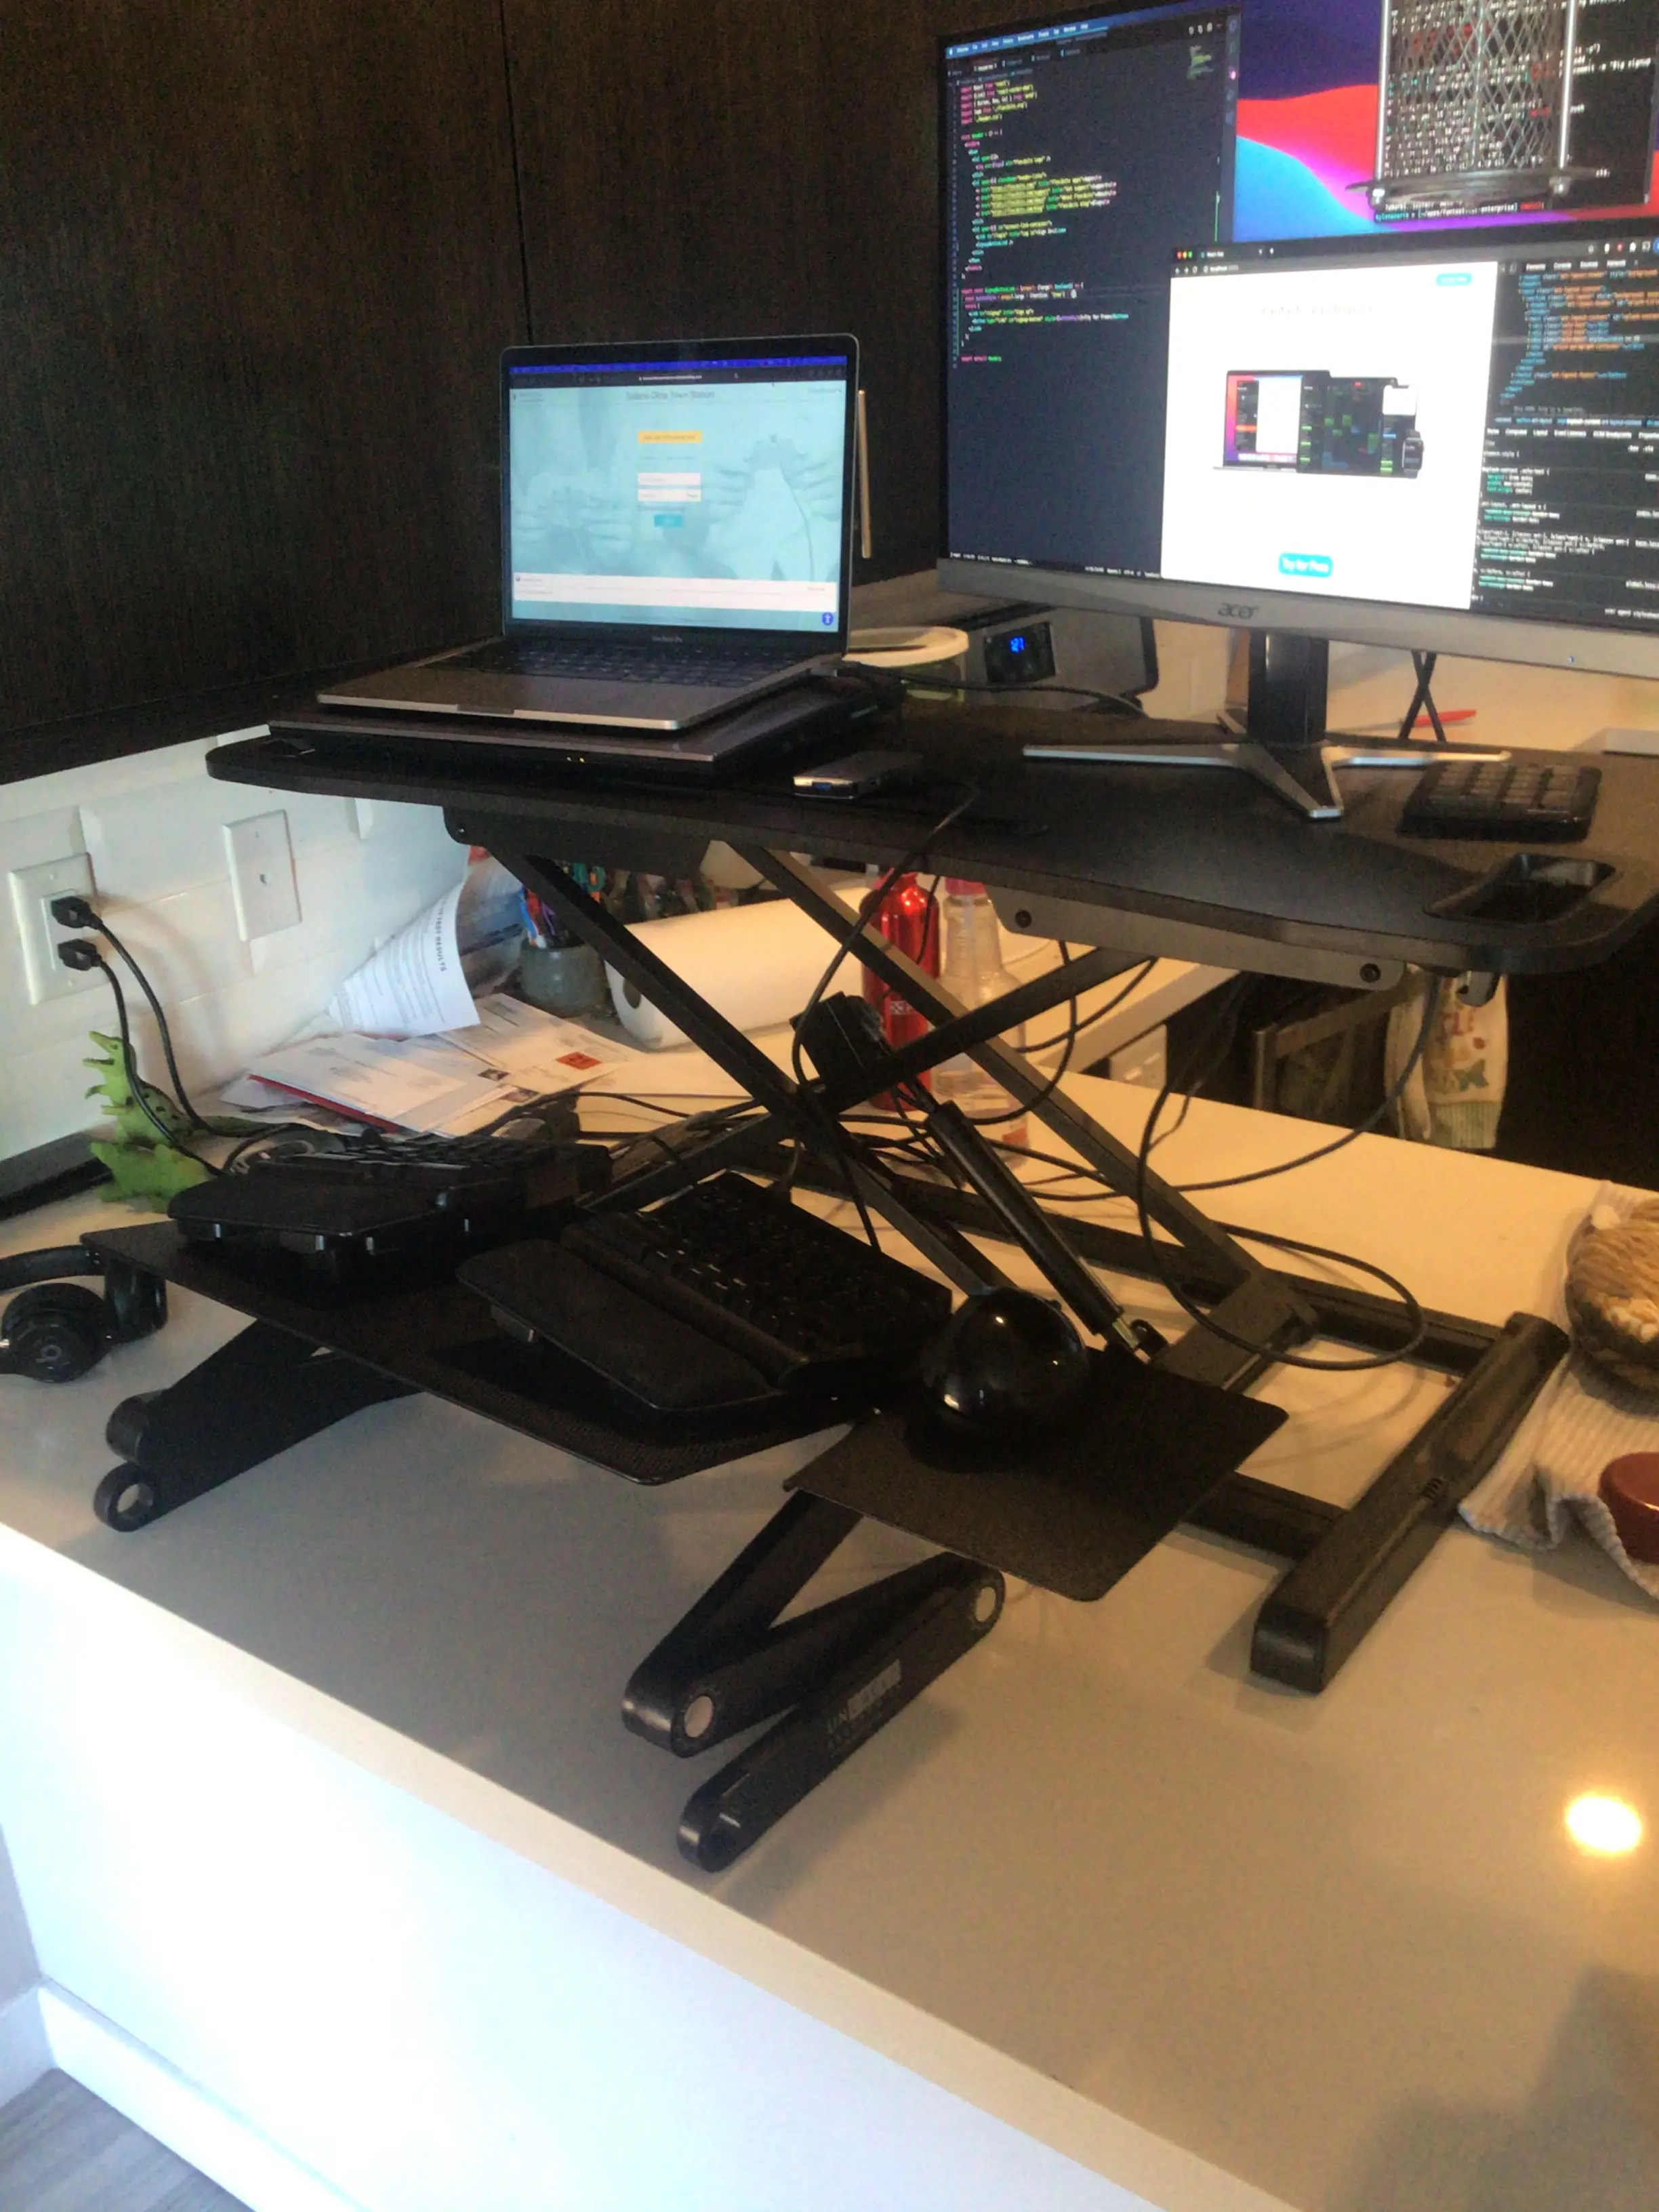 A standing desk with a laptop and external monitor on a kitchen counter